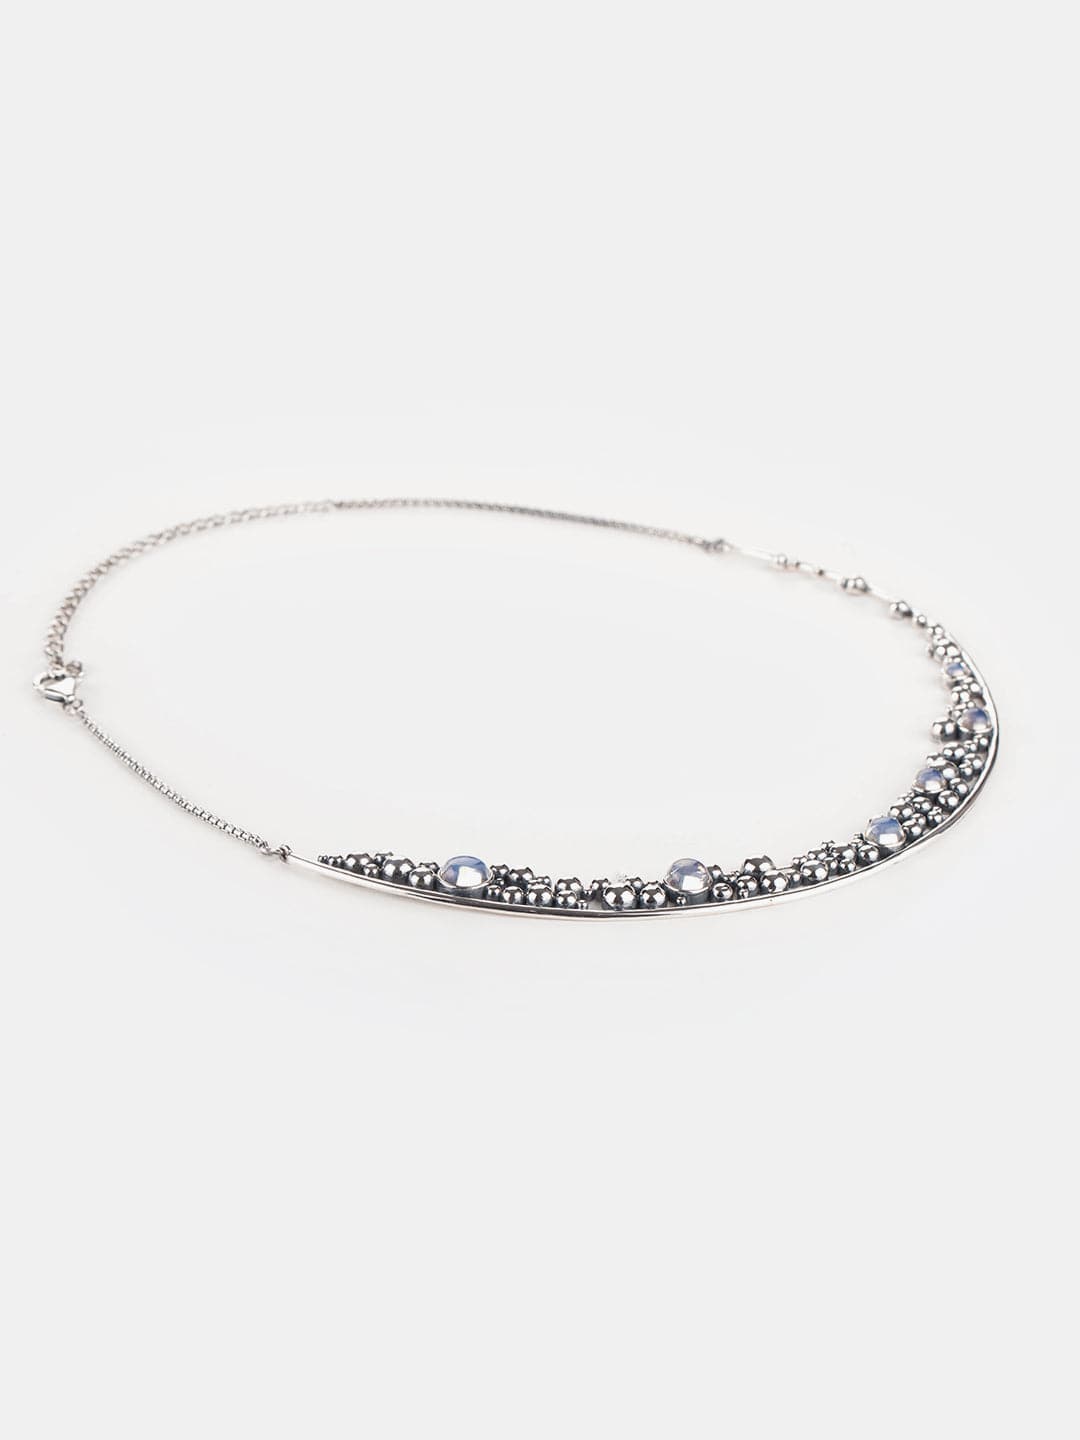 A Lazy Morning Necklace in 925 Silver